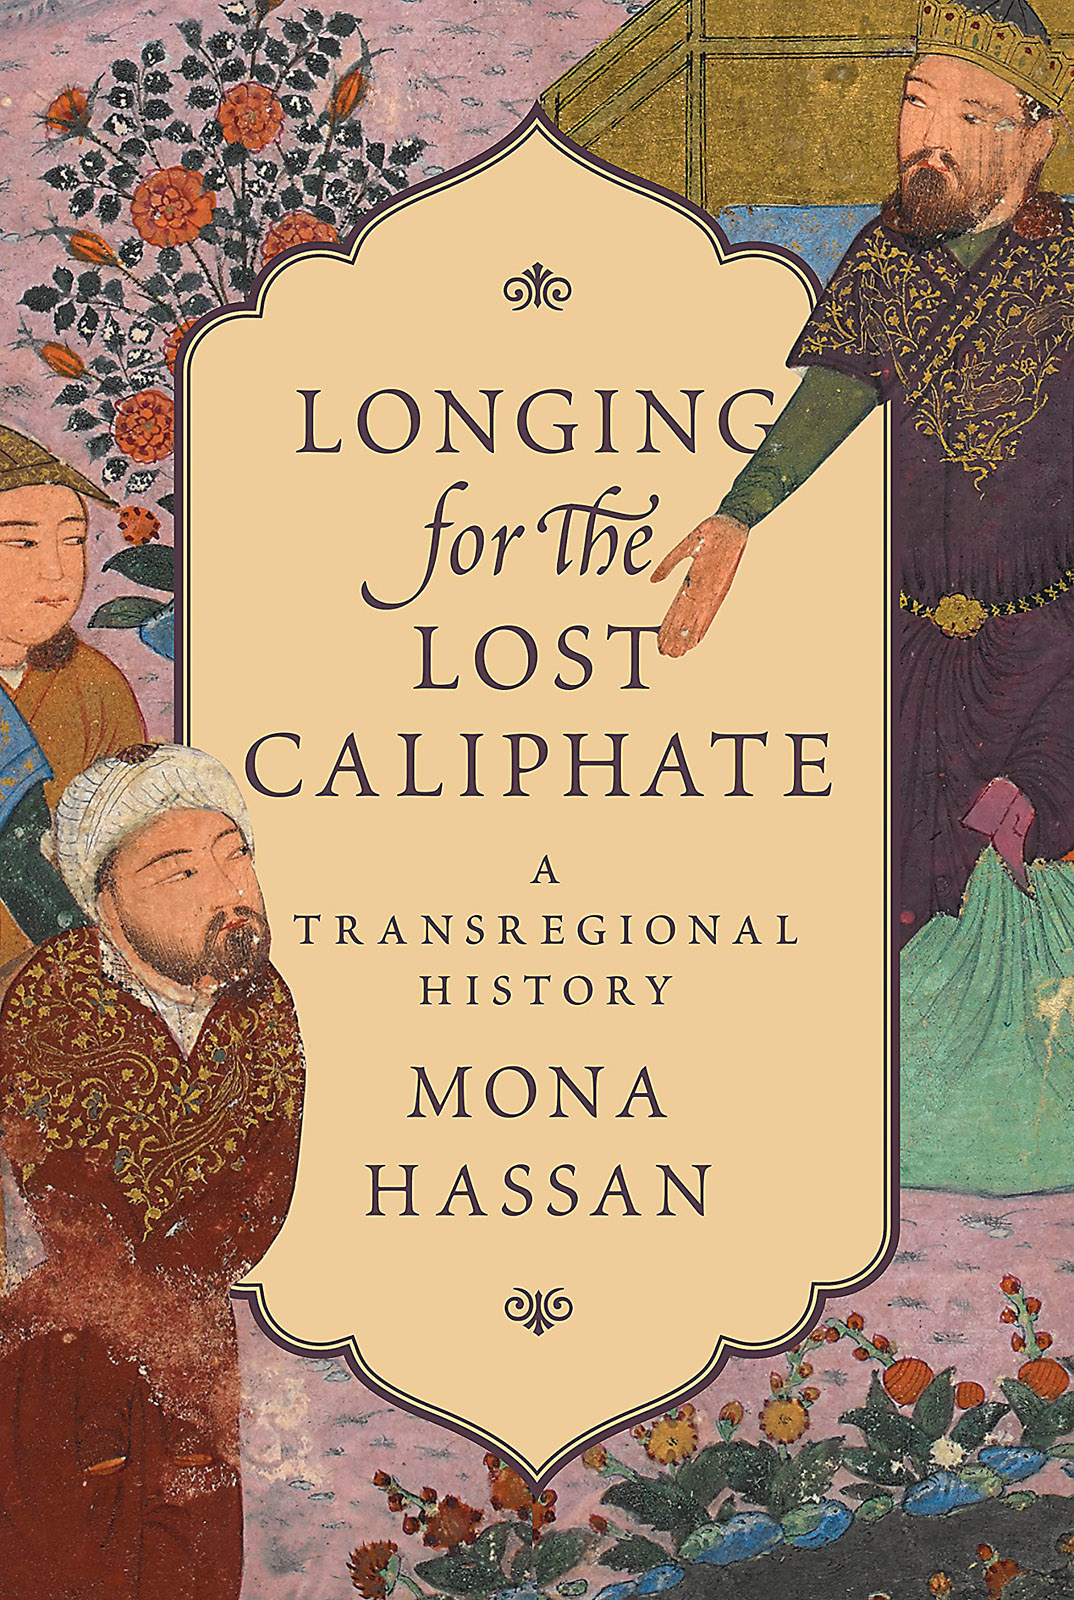 Longing for the Lost Caliphate: A Transregional History